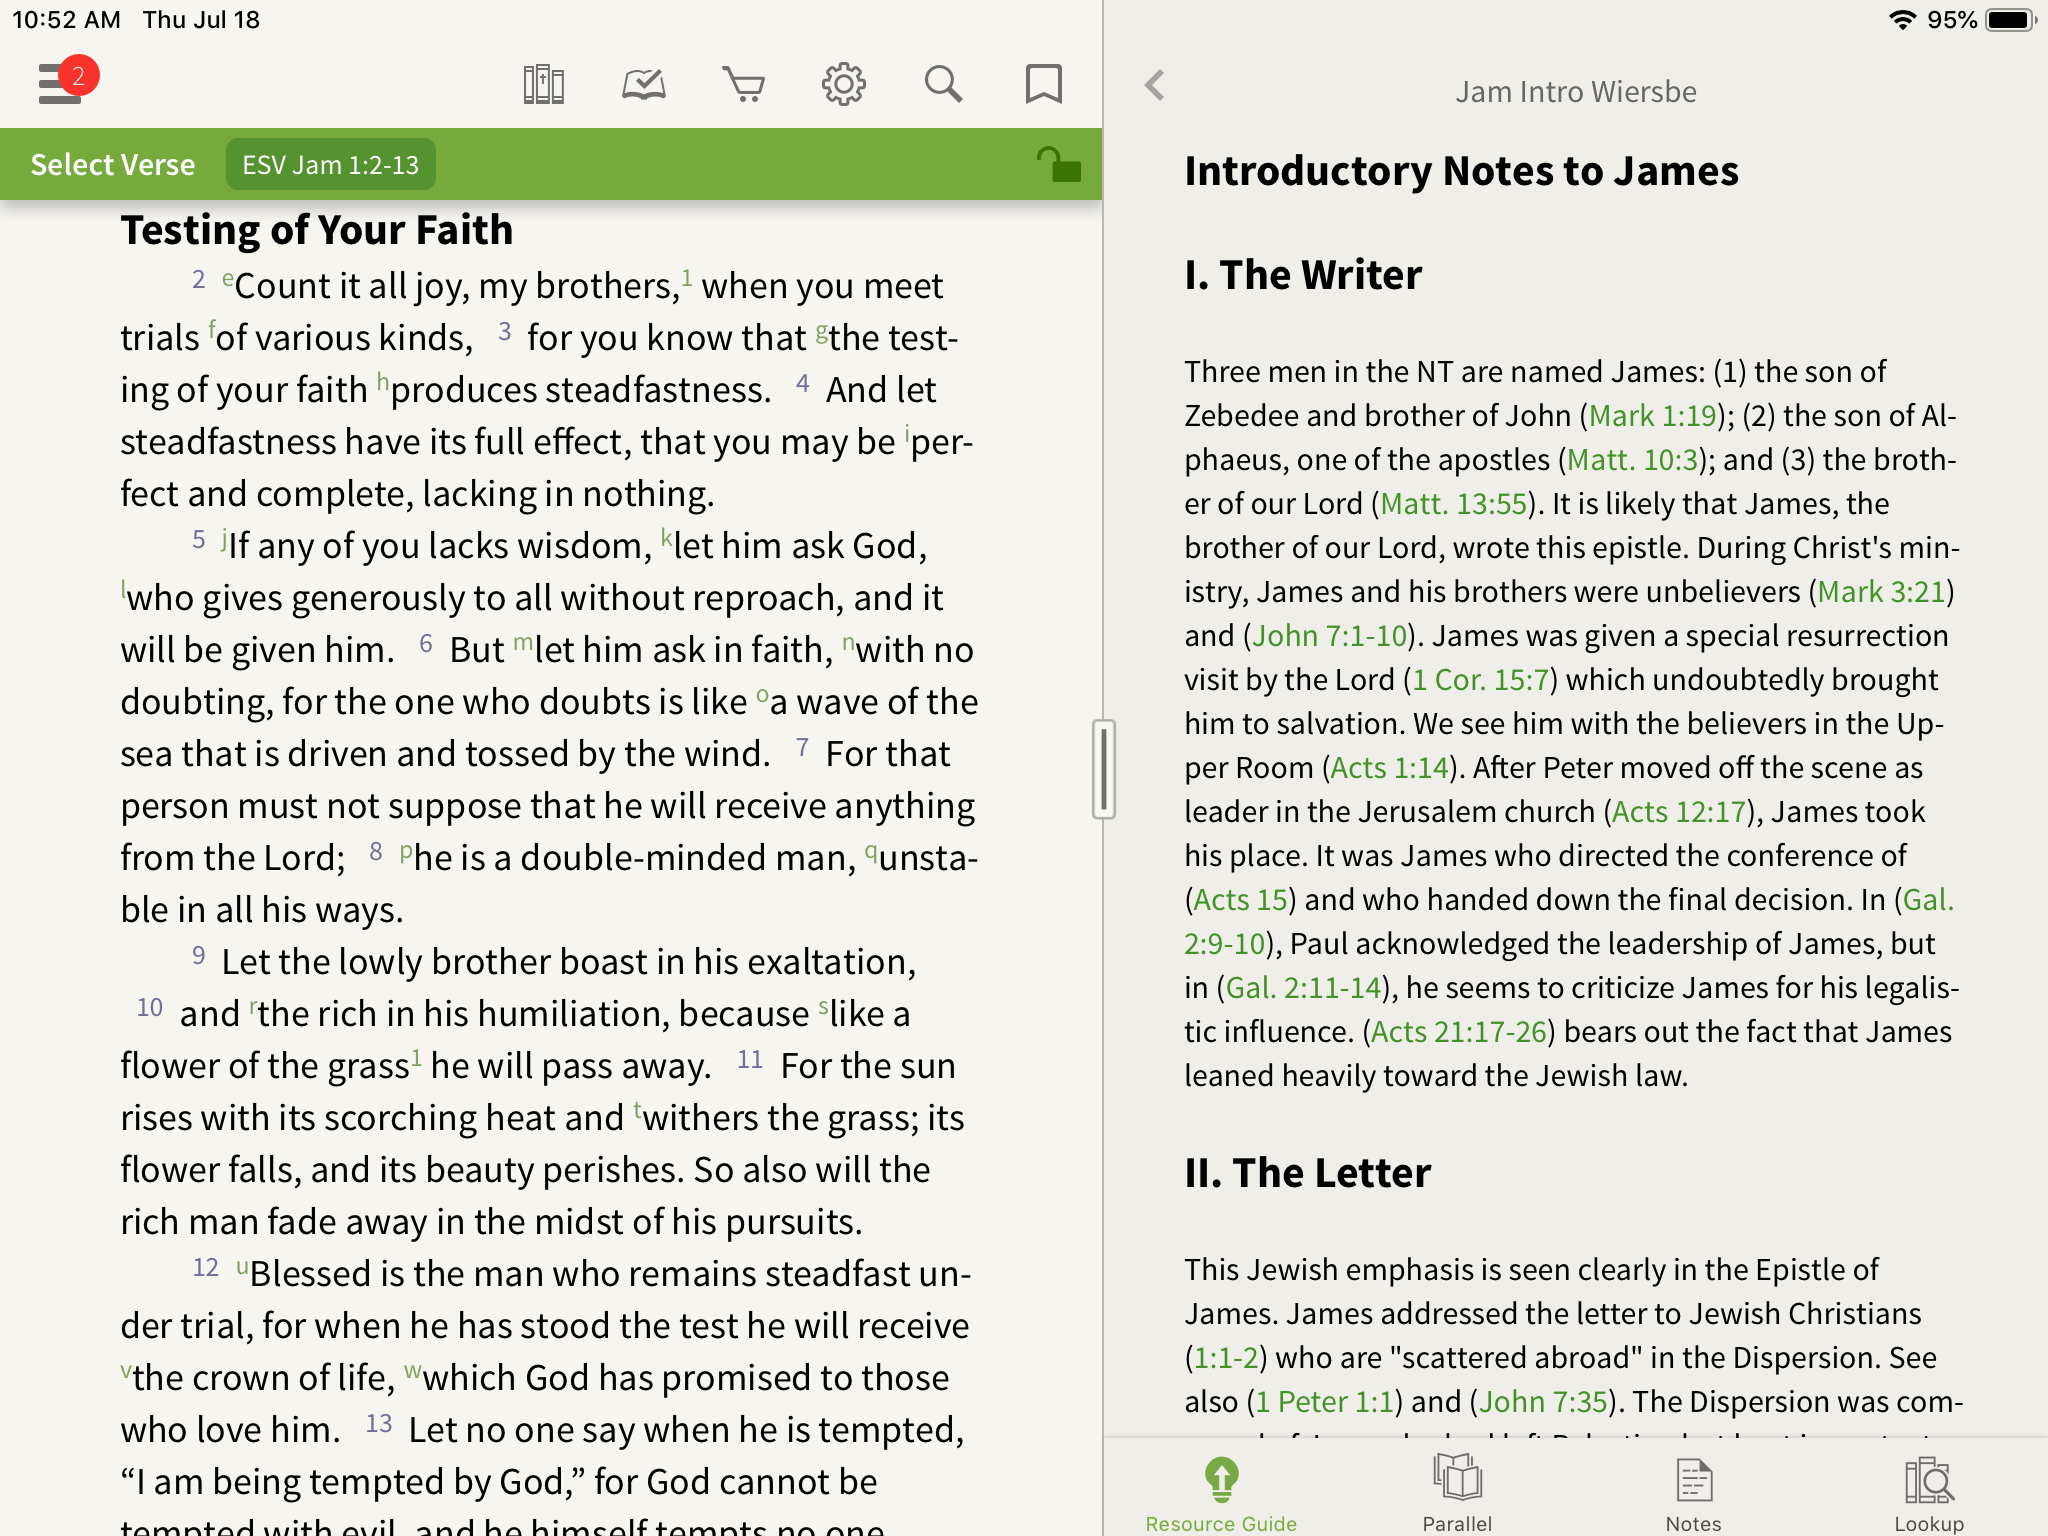 Wiersbe Introduction in the Olive Tree Bible App